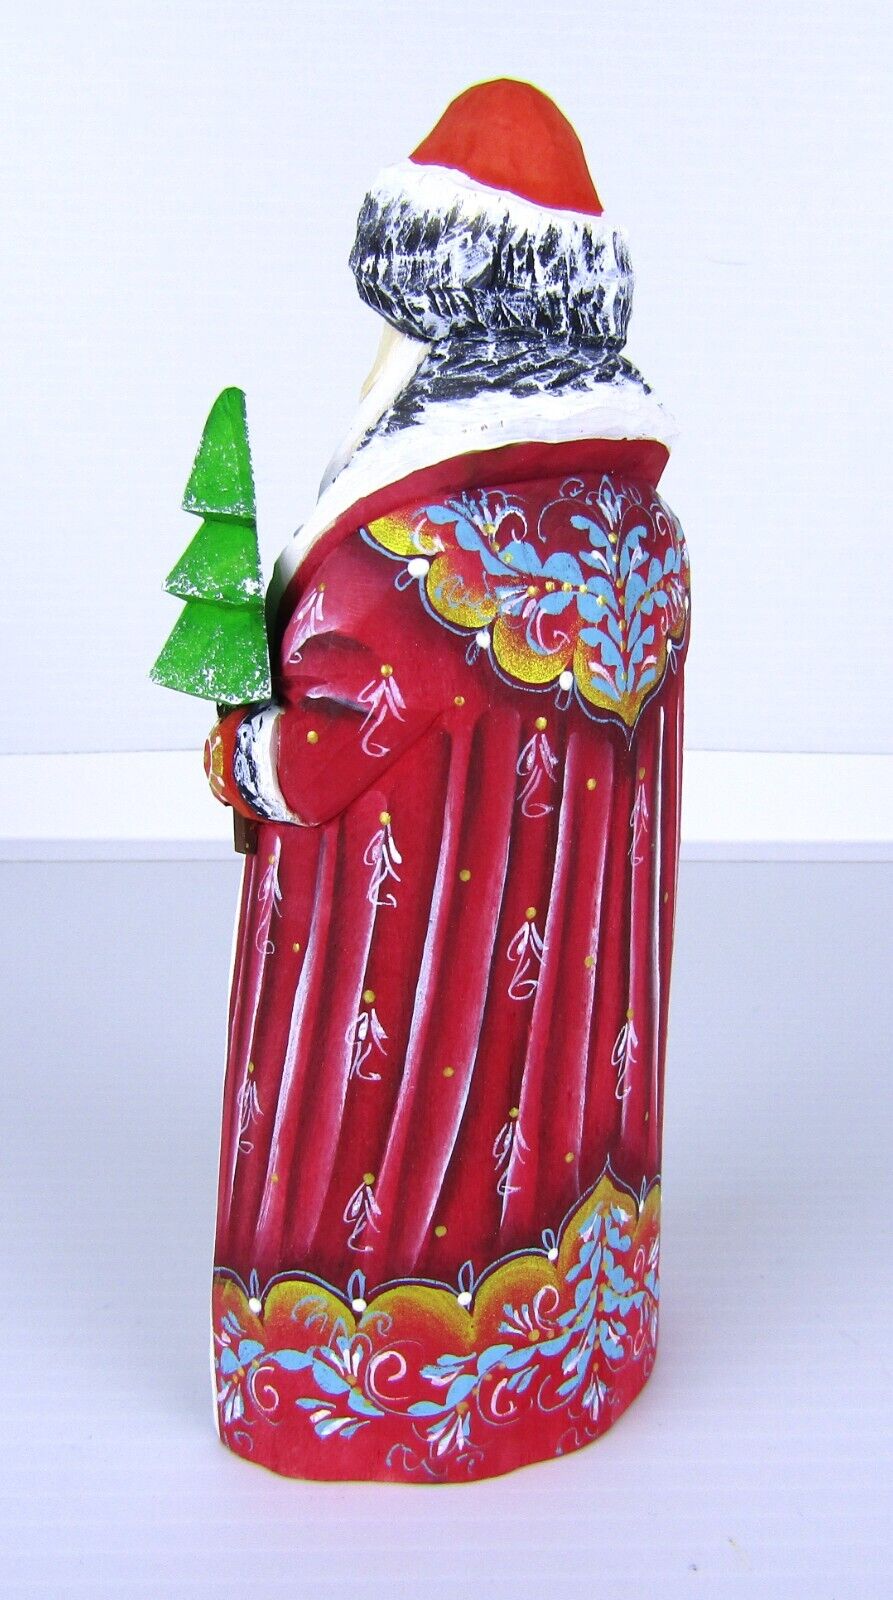 6" Russian Carved Santa Claus Red Figure Tree Staff Hand Made Linden Christmas Без бренда - фотография #3